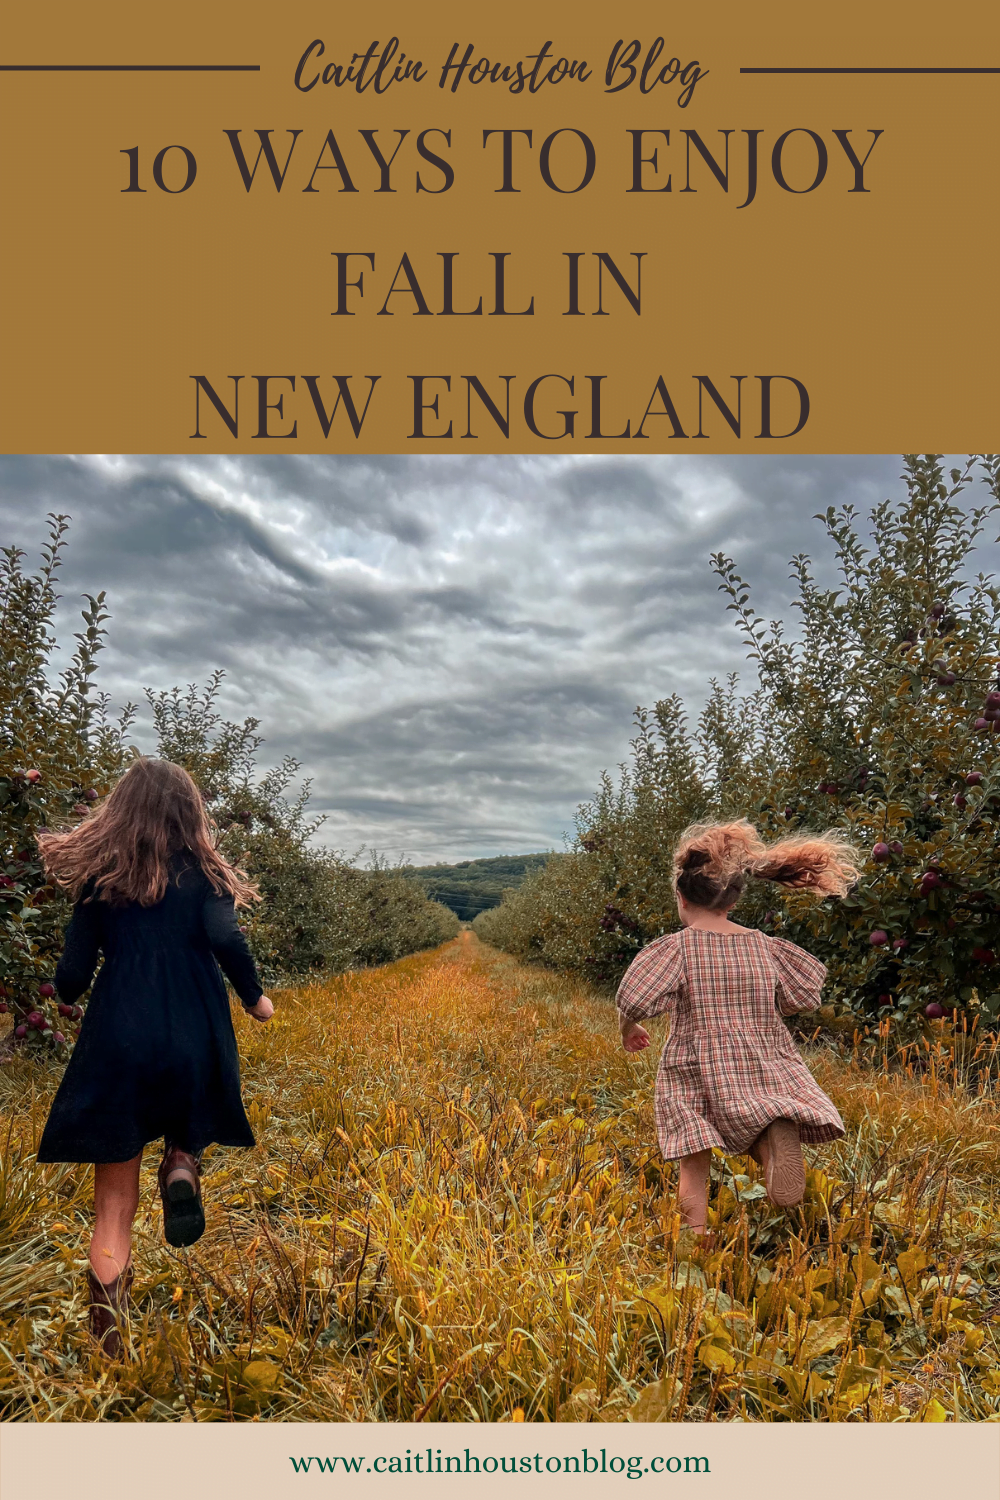 10 Ways to Enjoy Fall in New England